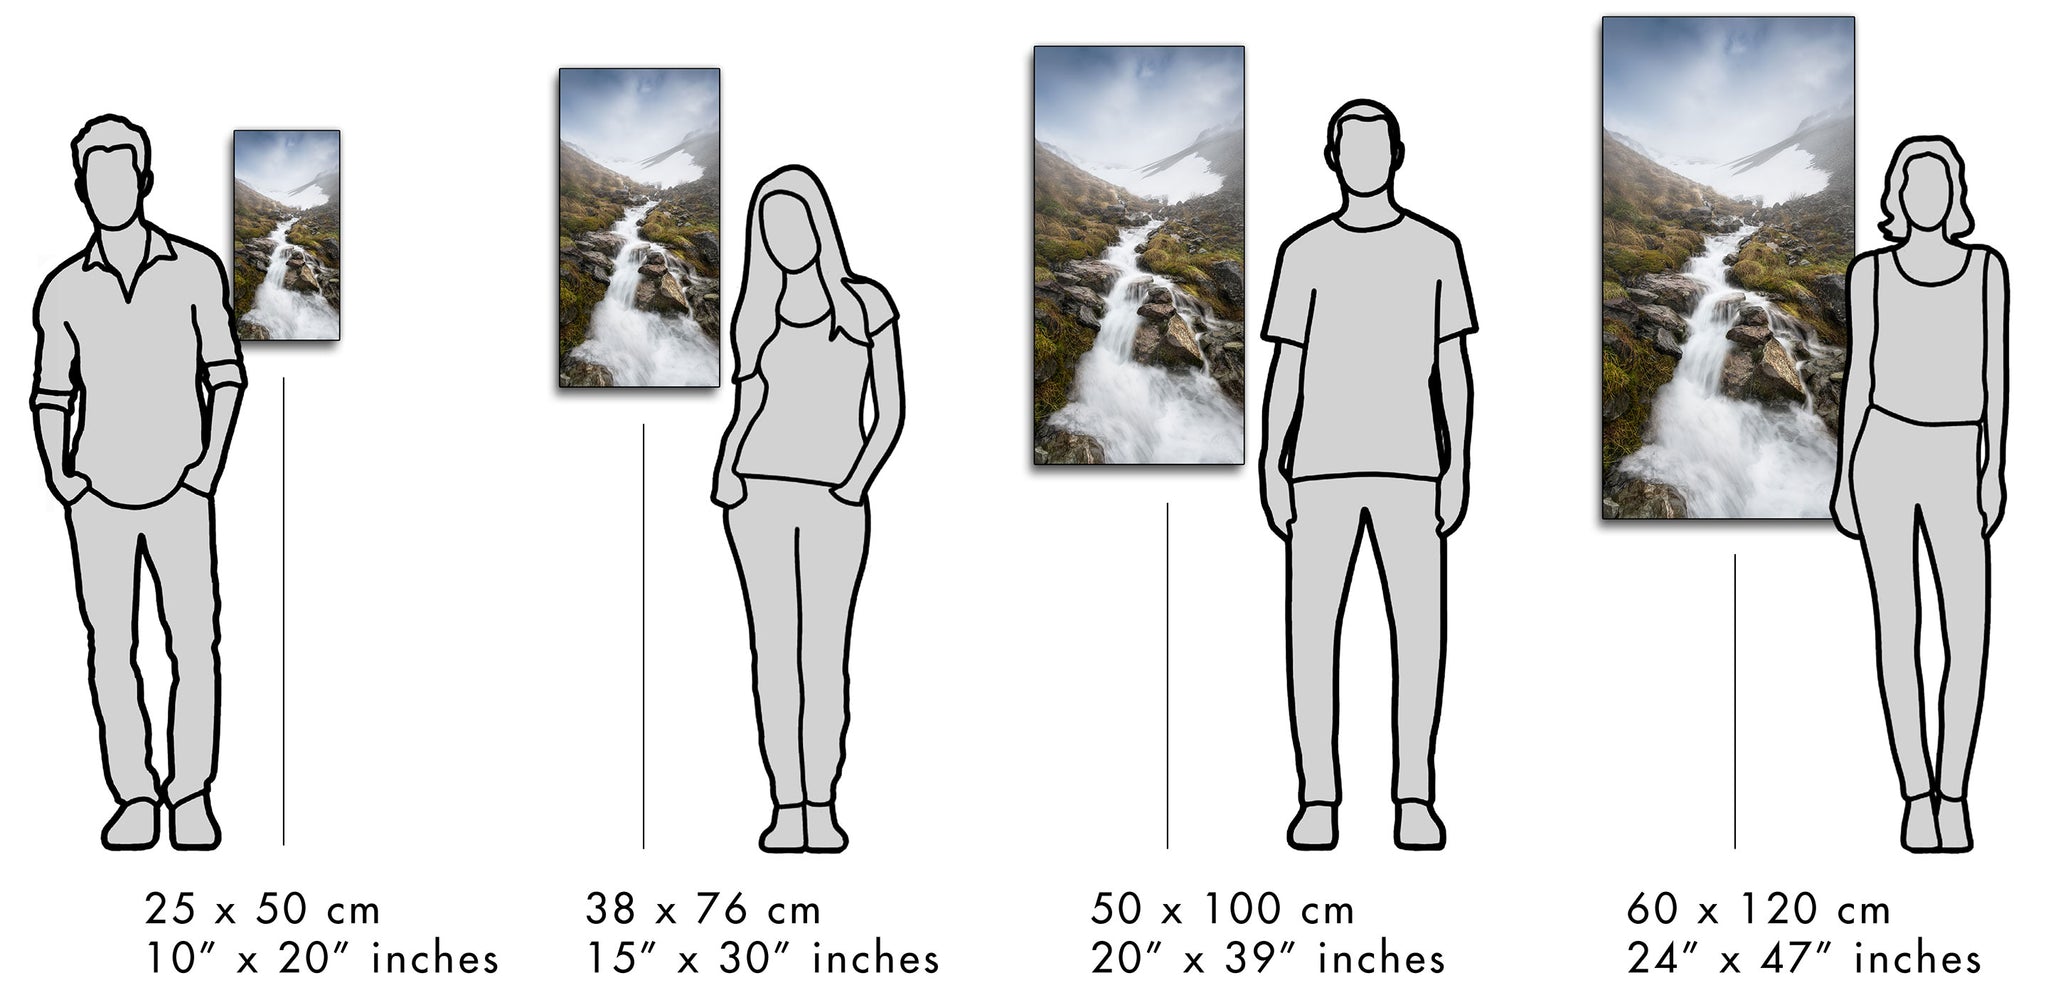 Visual guide that shows different print sizes next to people for comparison